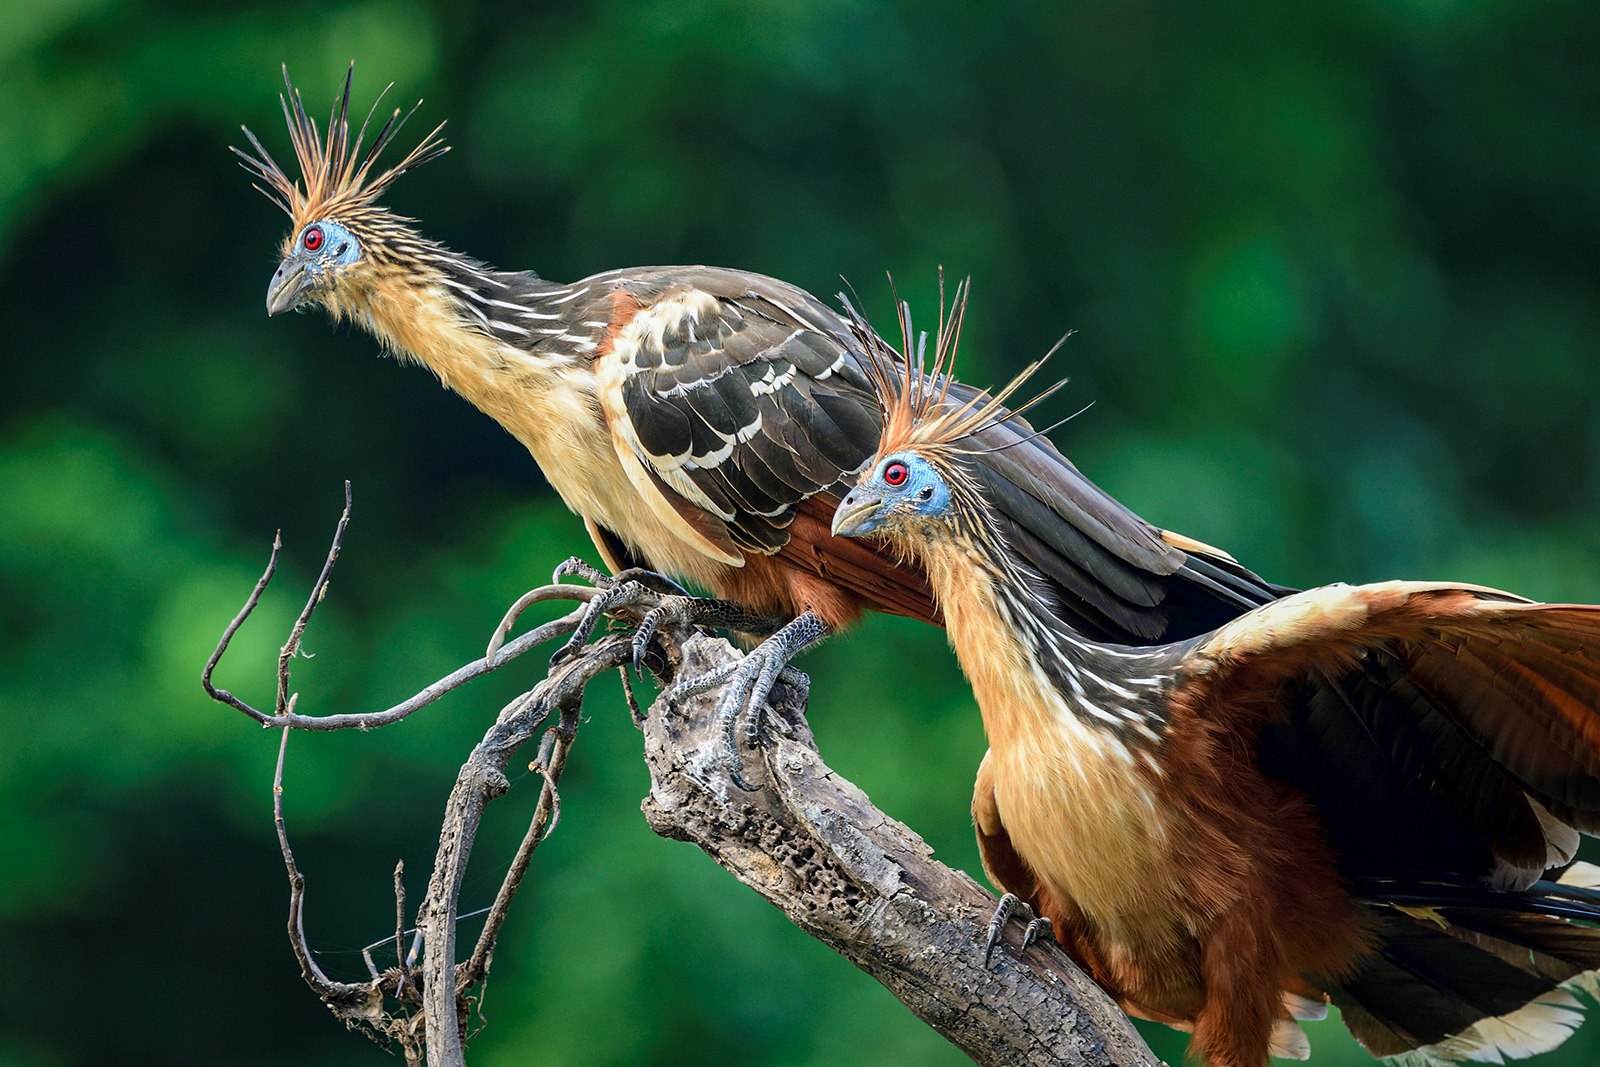 Two hoatzin birds on a branch in the Amazon